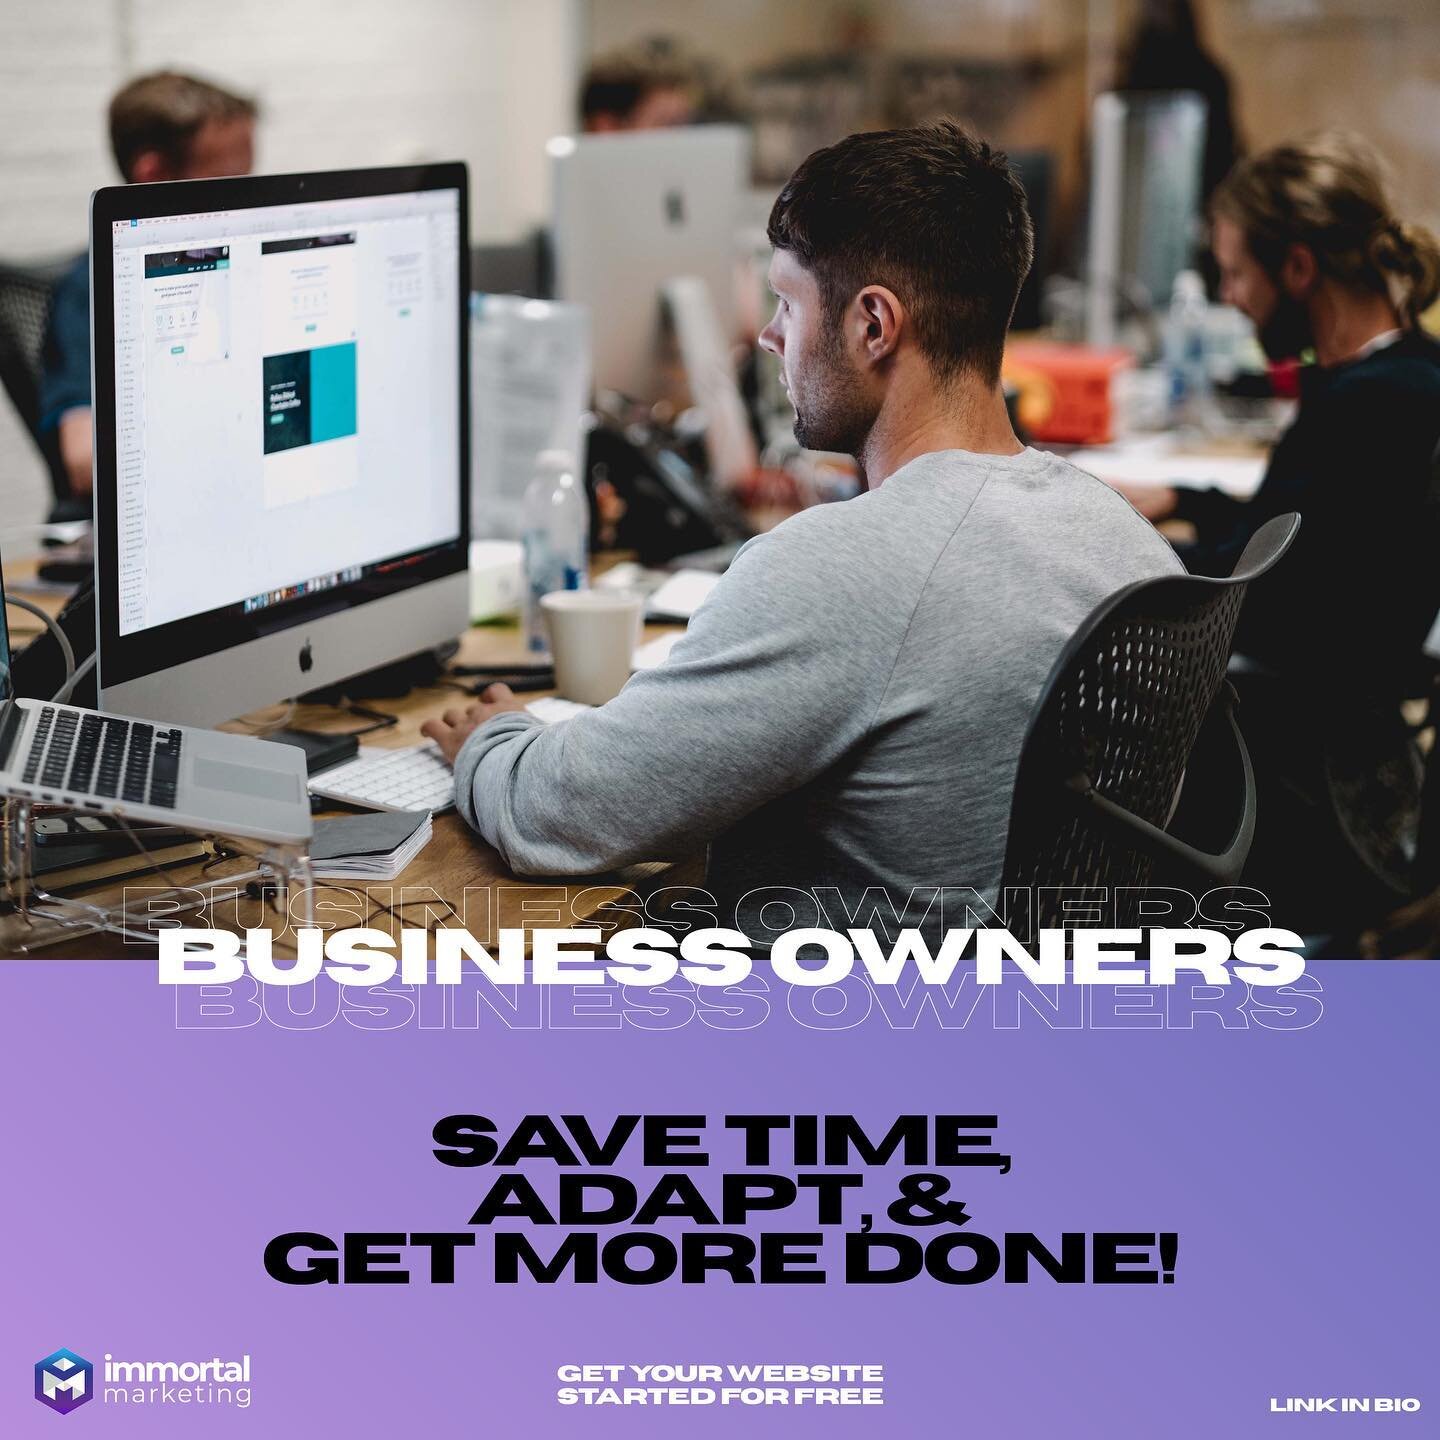 Save Time &amp; Stay Focused On Your Business 👨🏻&zwj;💼👩🏻&zwj;🔬

We get it. Starting your own business can be intimidating and overwhelming. That's why we offer websites for local businesses that need one. Our team of designers will work with yo